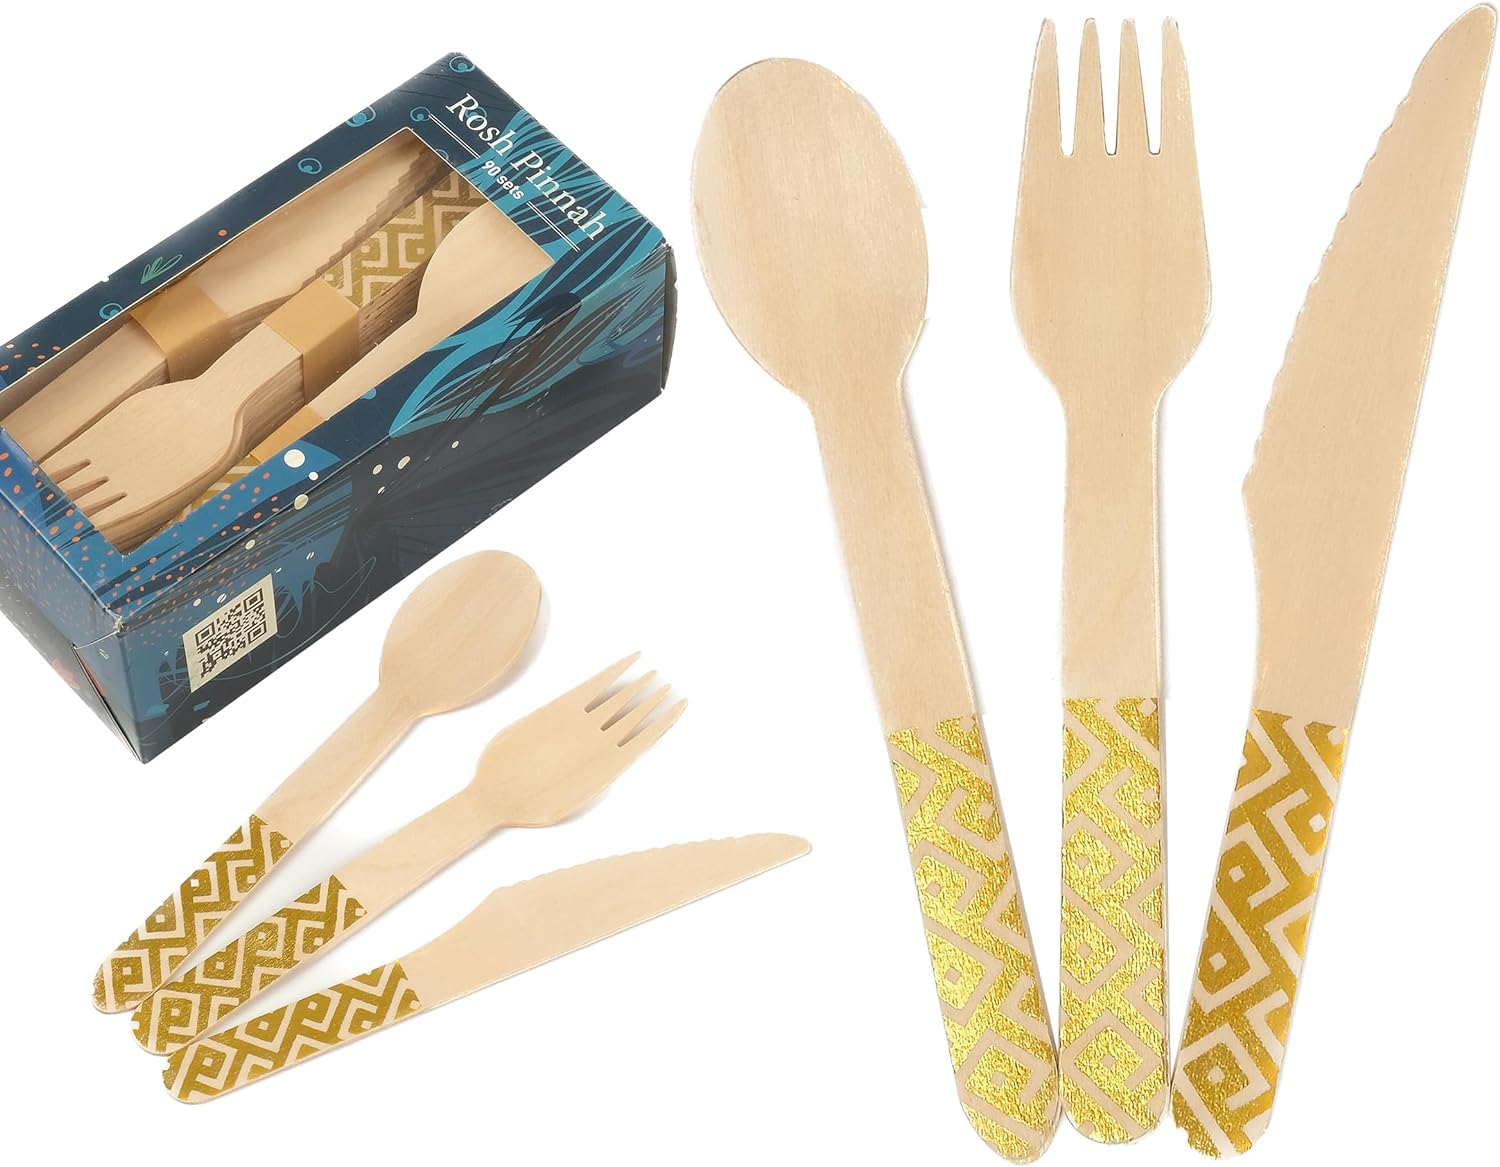 rosh pinnah disposable wooden cutlery set stylish gold foiled utensils 90 pcs 30 forks 30 knives 30 spoons 100 compostab